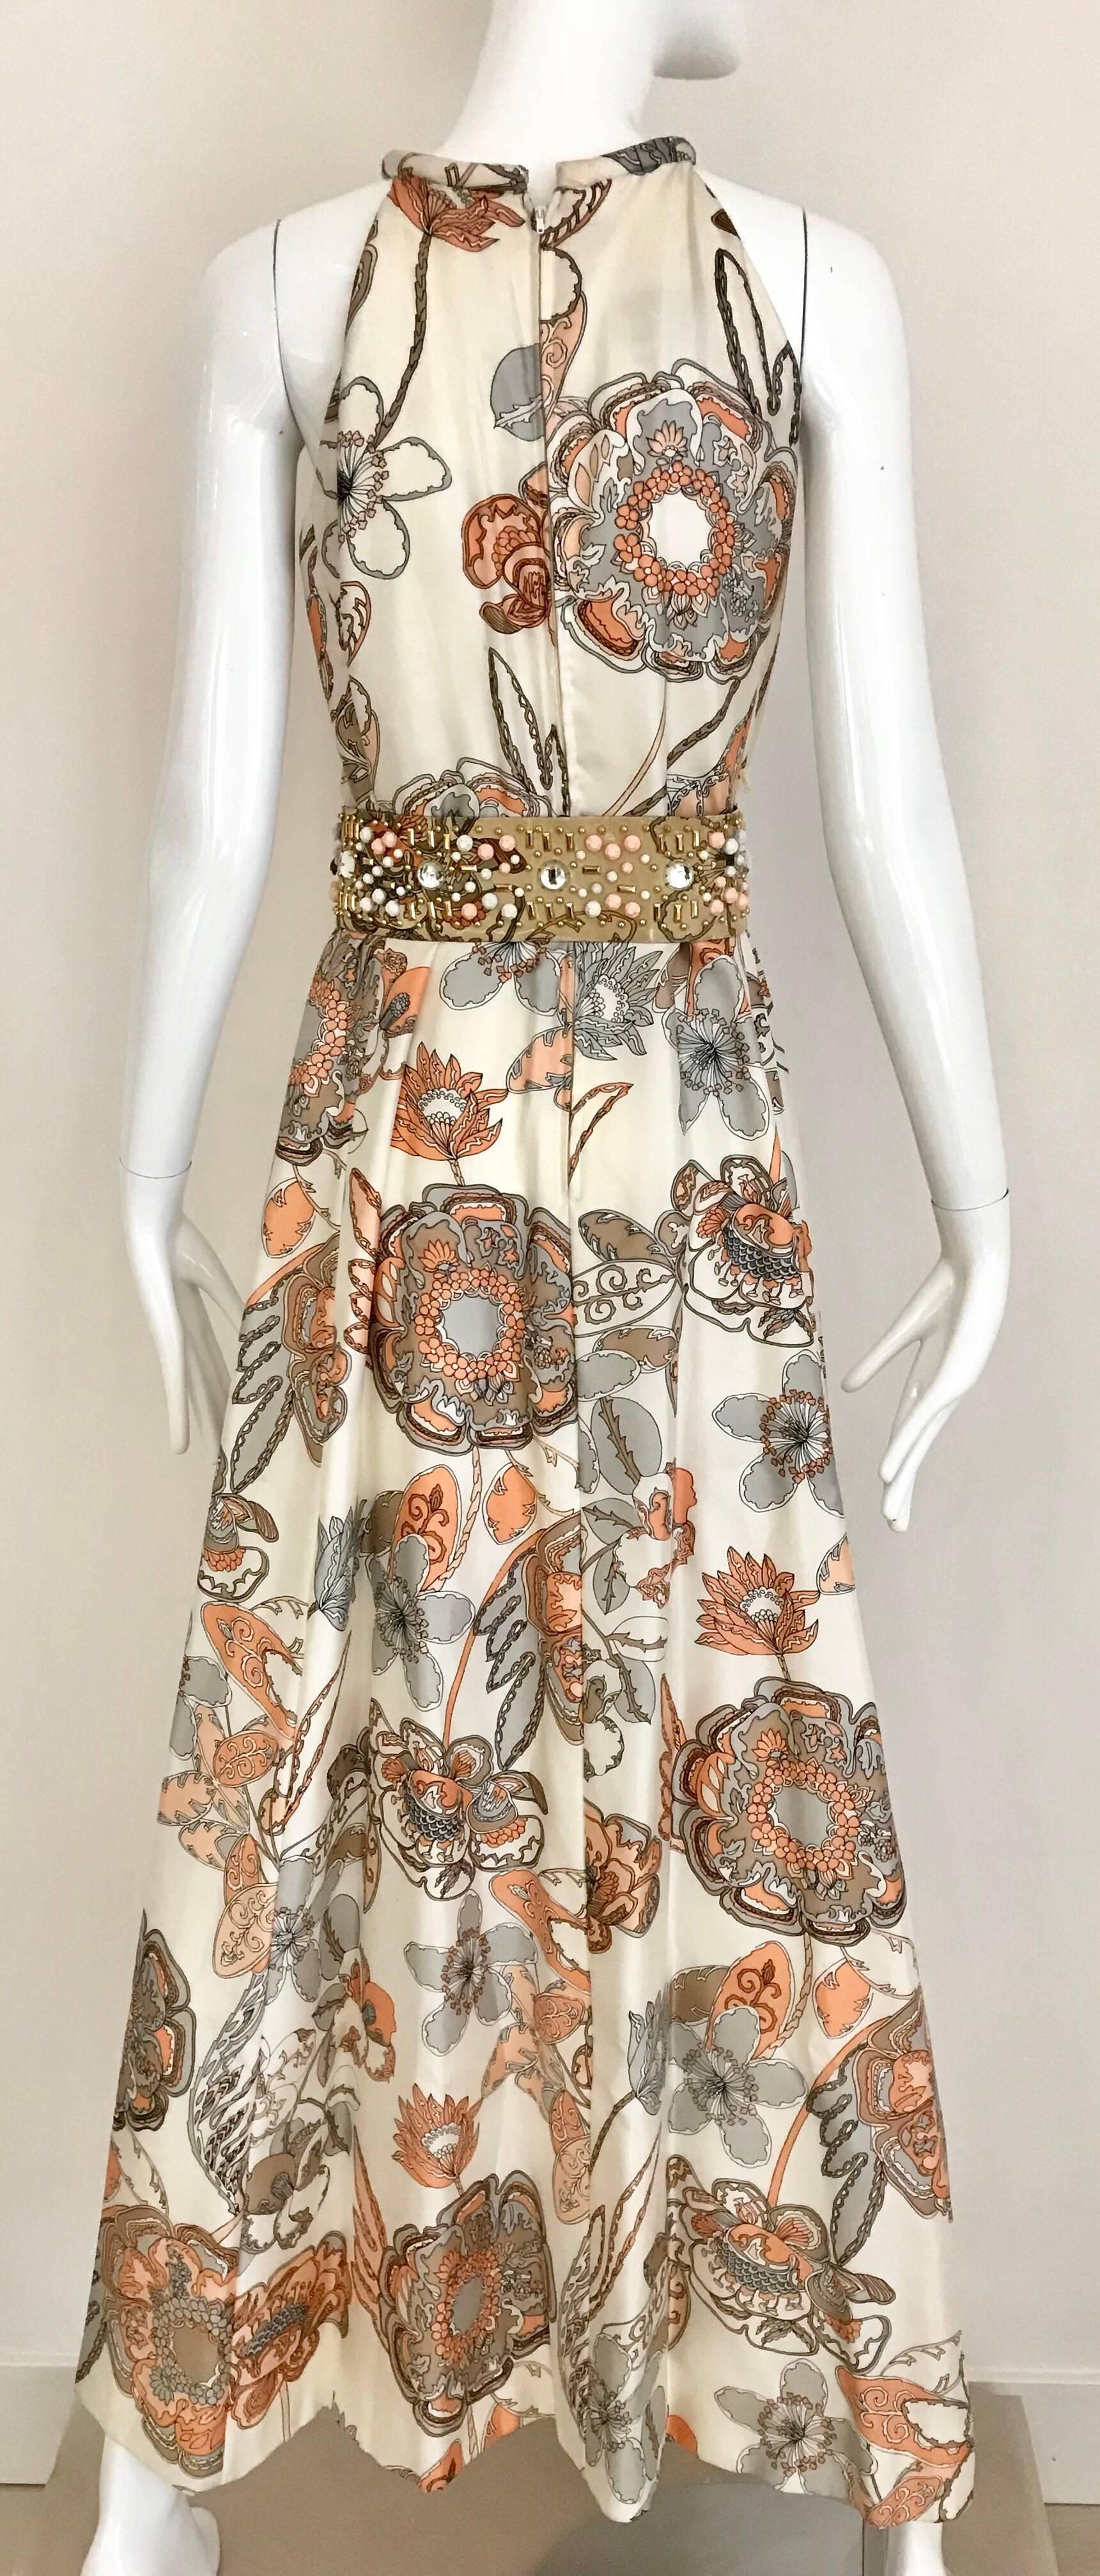 Elegant 1970s Sleeveless silk  Malcolm Starr Creme and Peach Floral Print Silk Dress with Jeweled belt. Size Small/ 2-4
Bust: 34